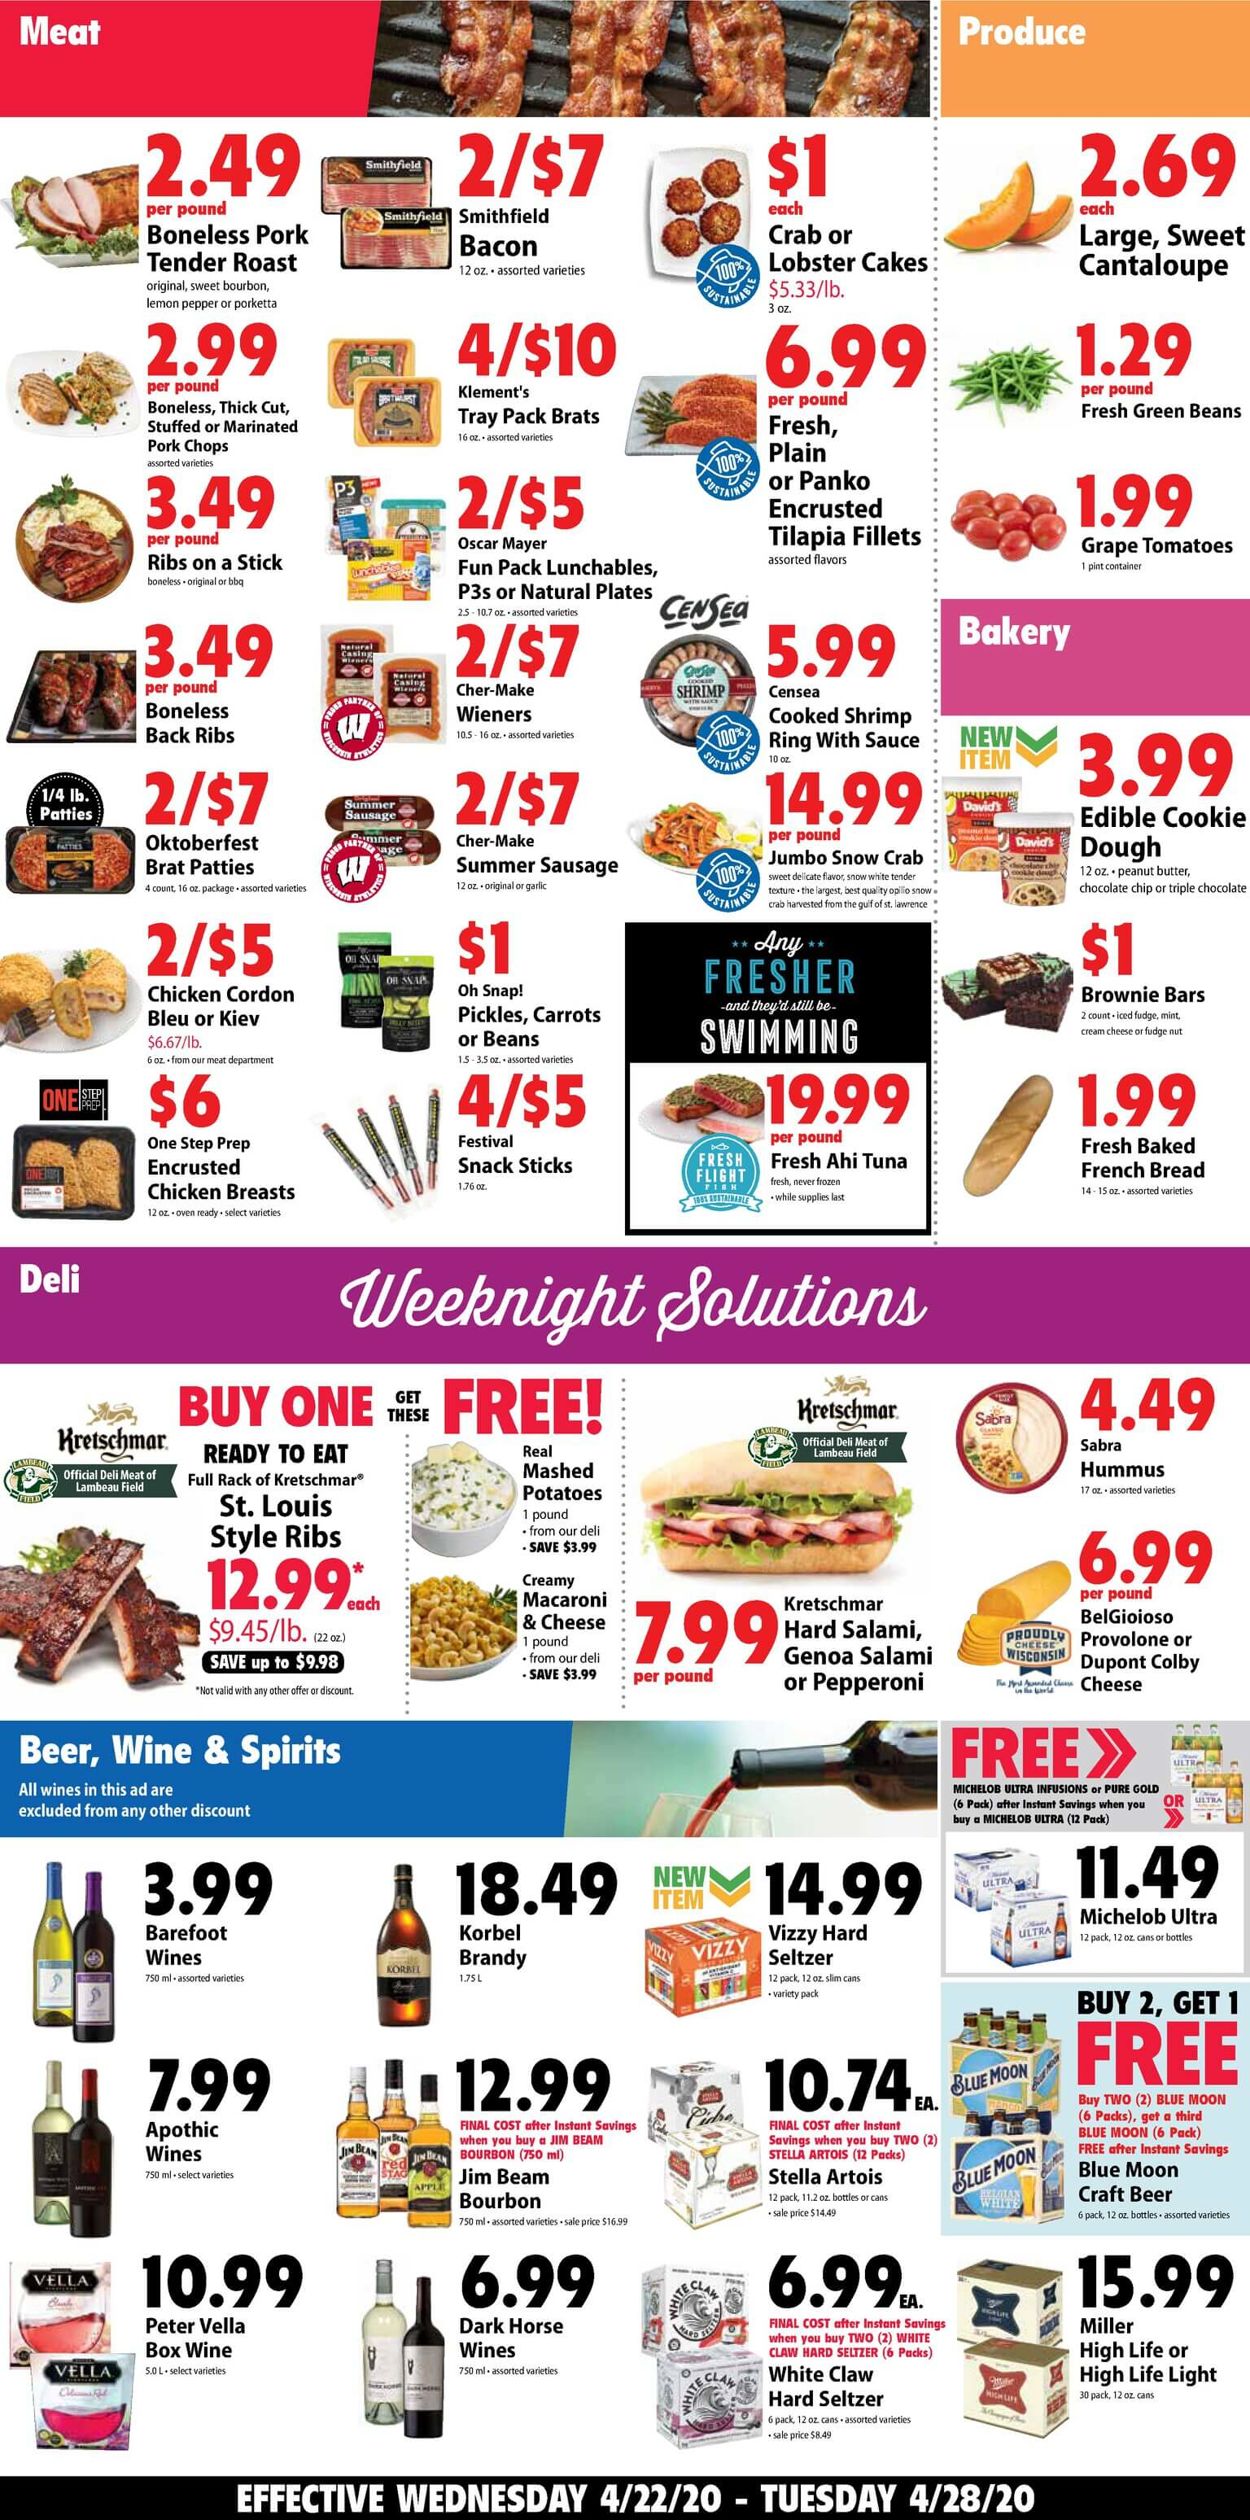 Festival Foods Current weekly ad 04/22 - 04/28/2020 [2] - frequent-ads.com